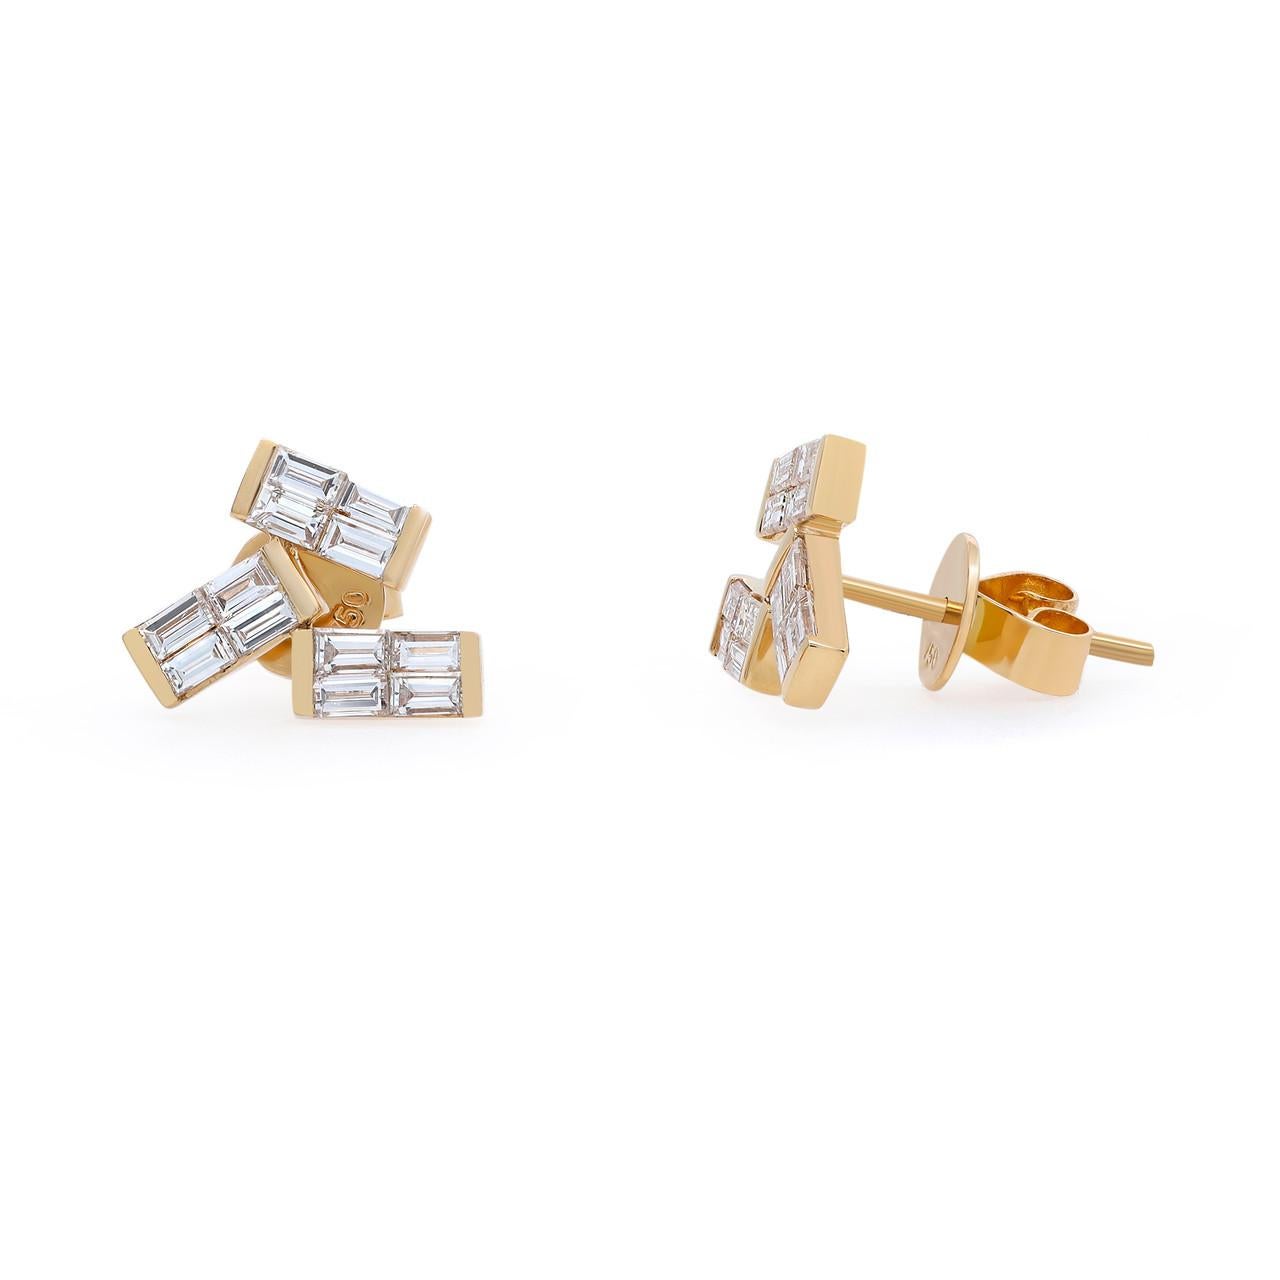 Introducing the chic and timeless 0.83 Carat Baguette Diamond Stud Earrings in 18K Yellow Gold. These exquisite earrings feature a cluster of stunning baguette-cut diamonds, totaling 0.83 carats. The diamonds are meticulously selected, boasting G-H